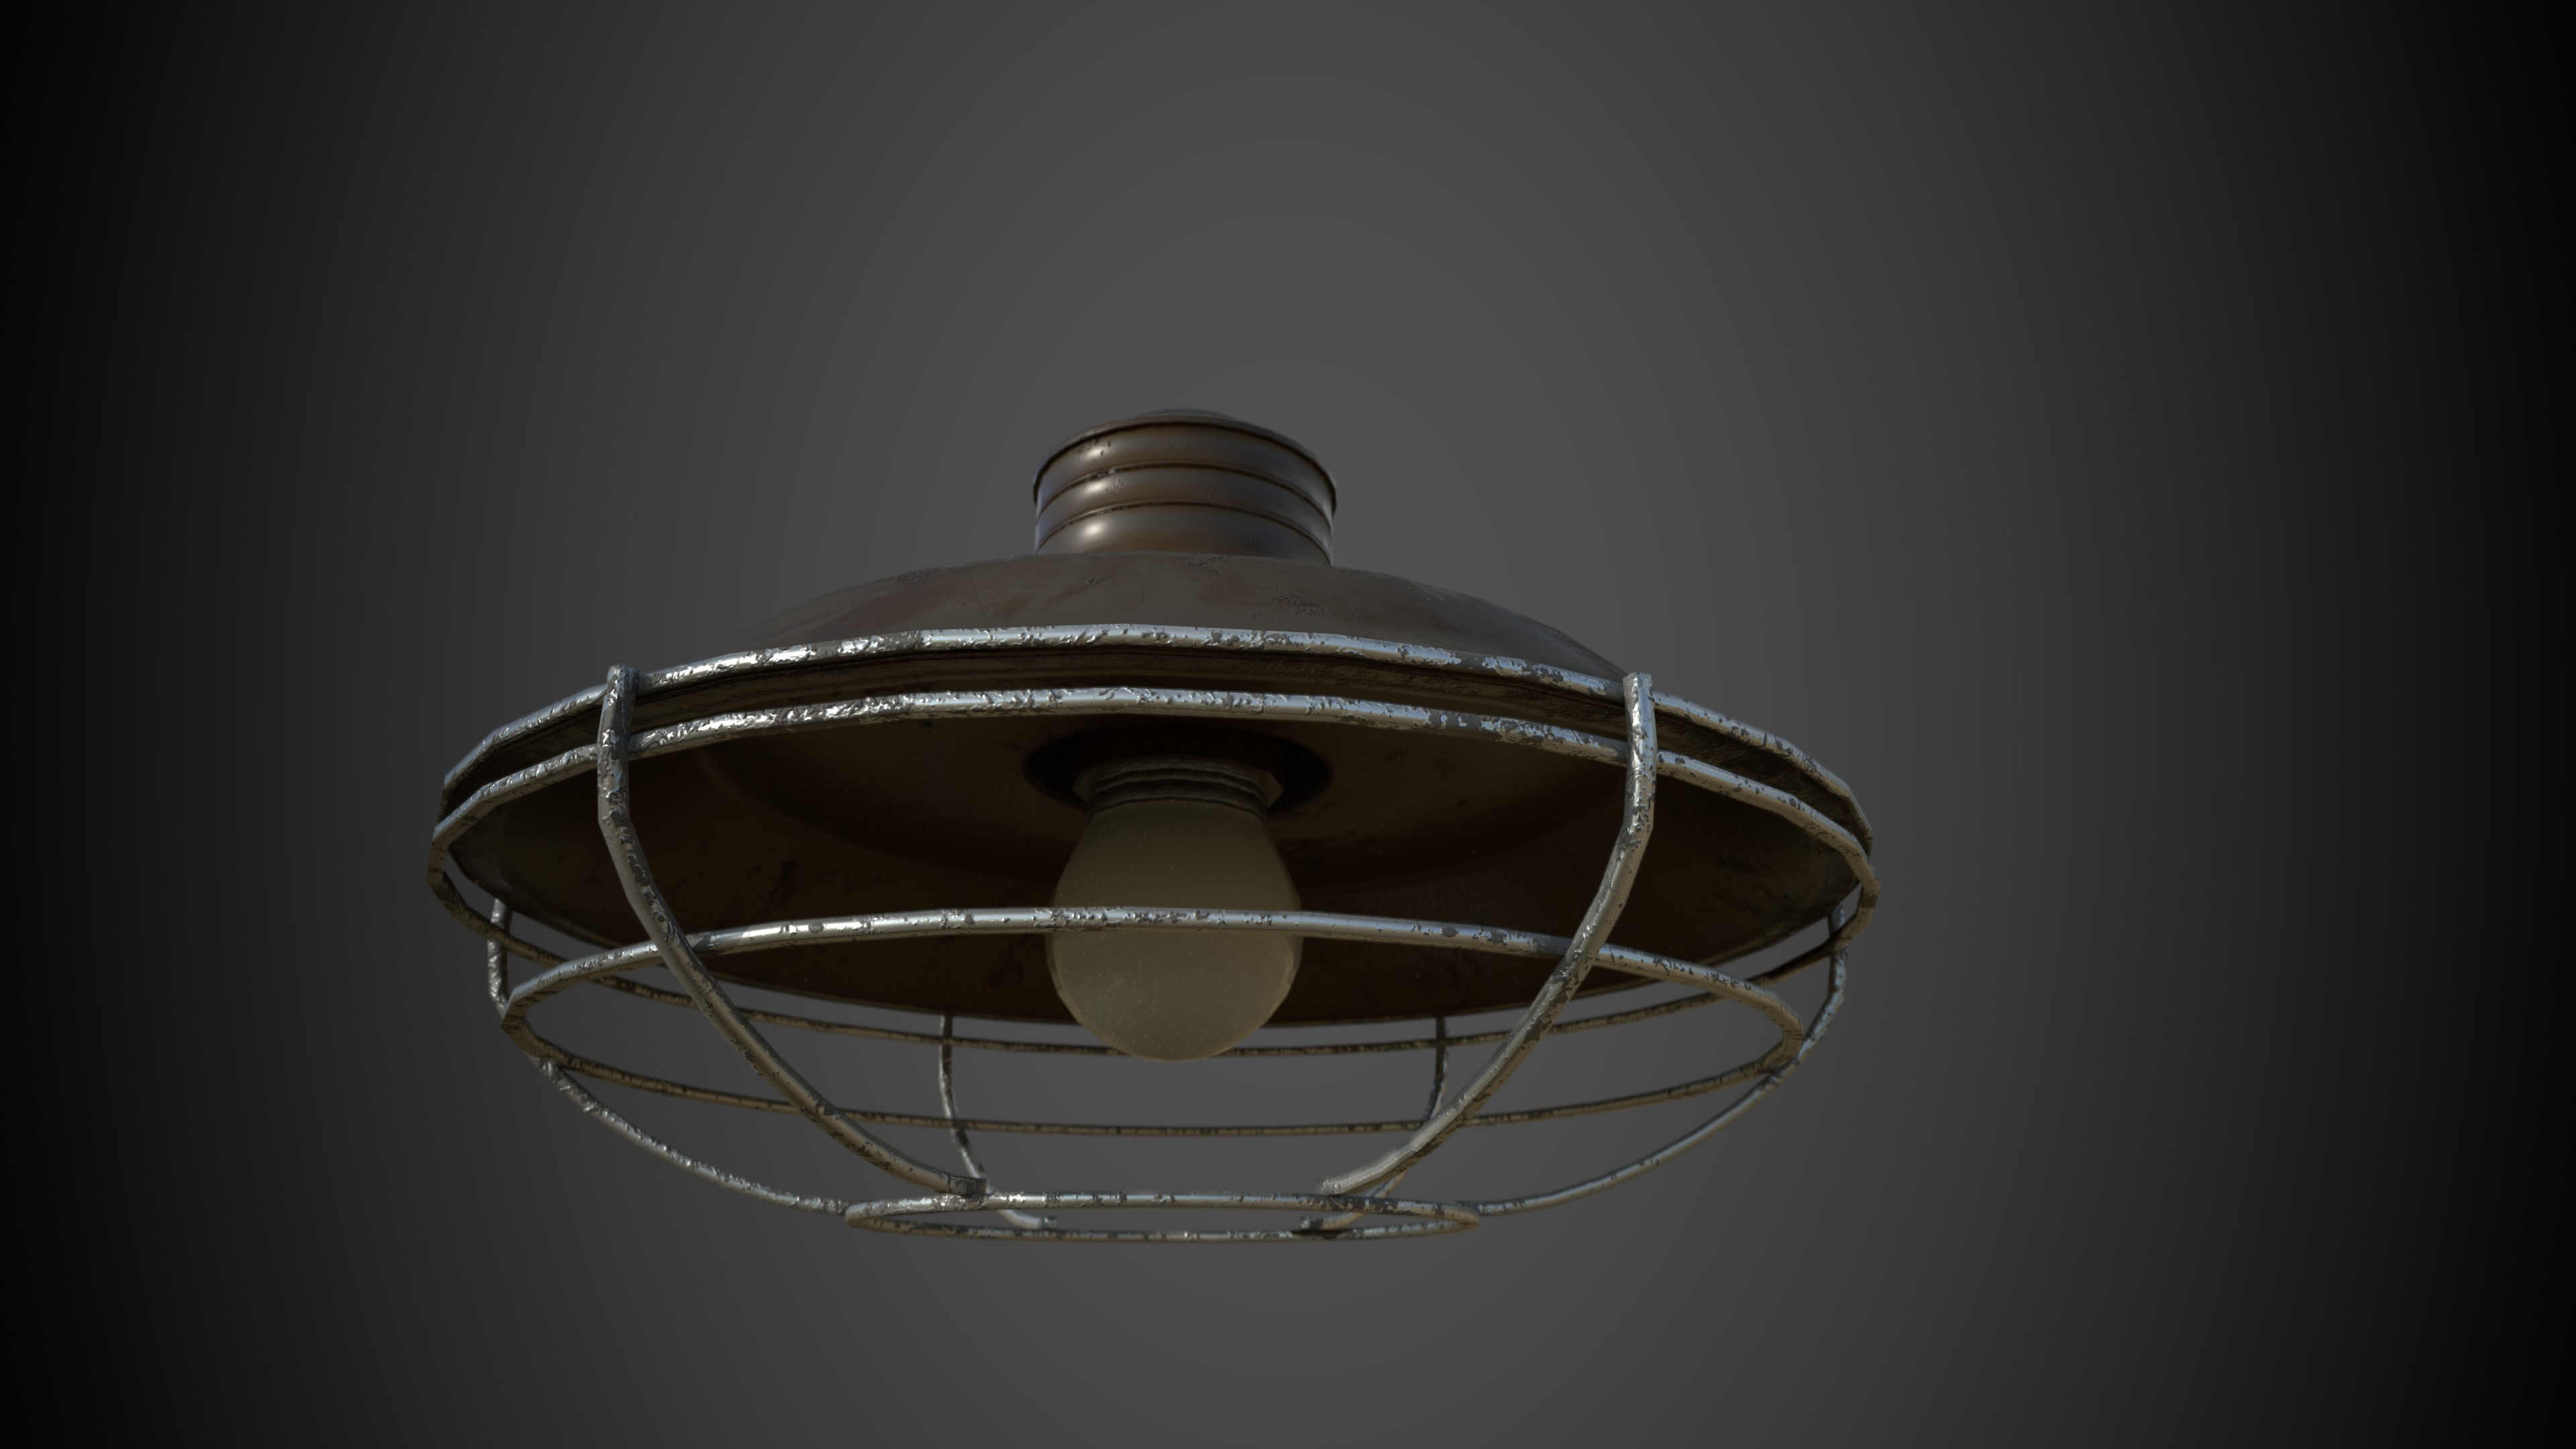 Hanging lamp - Rendered in Iray